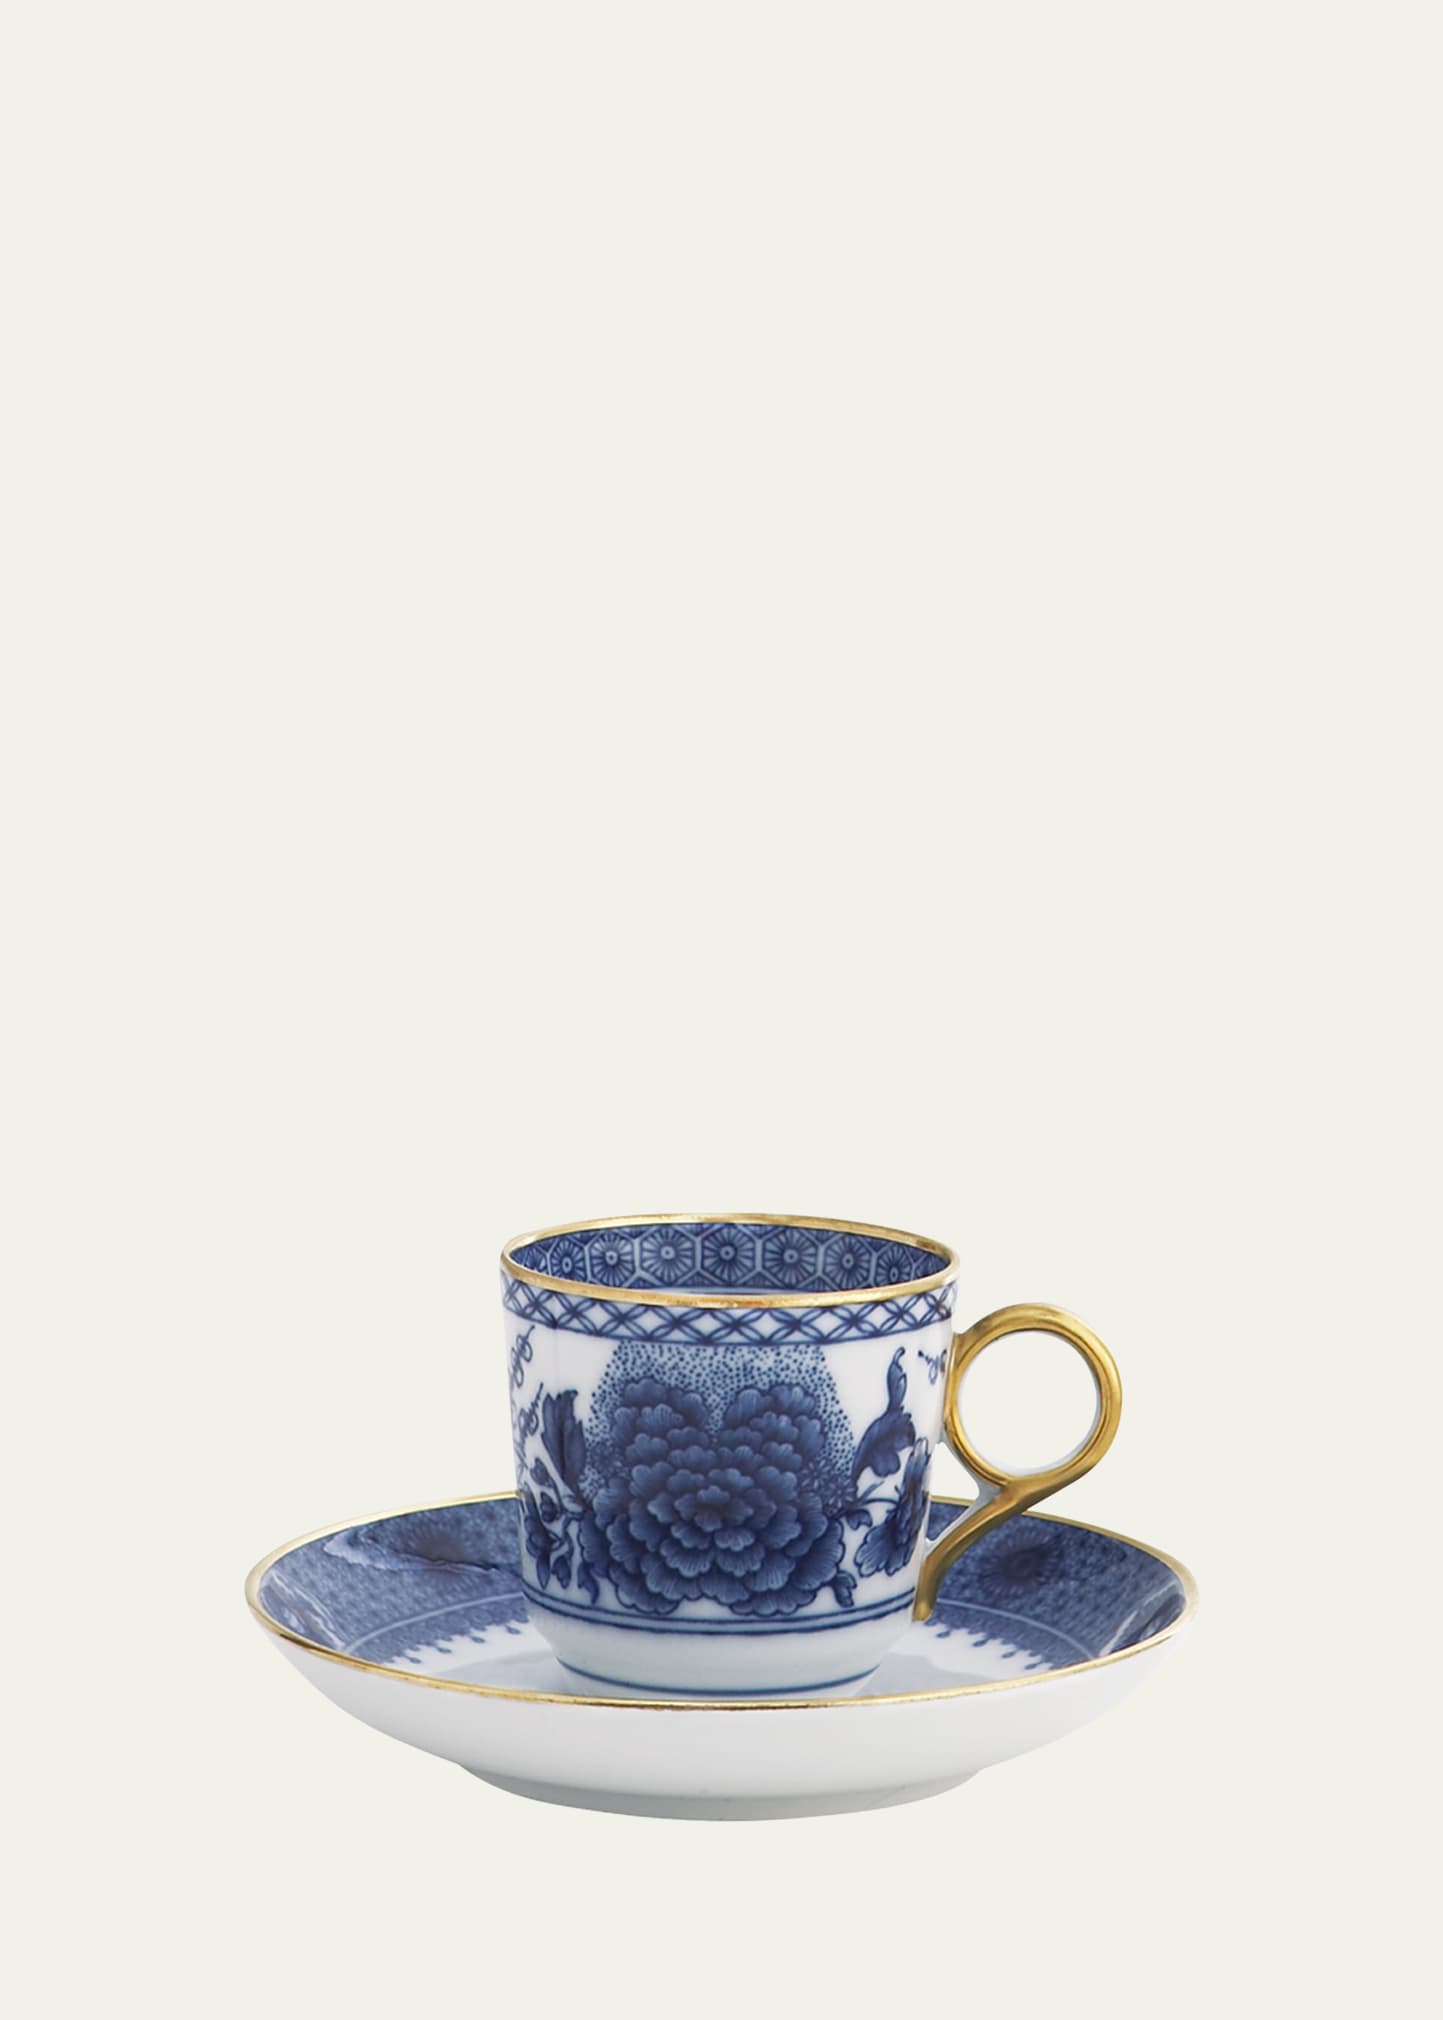 Mottahedeh Imperial Blue Demitasse Cup & Saucer Plate